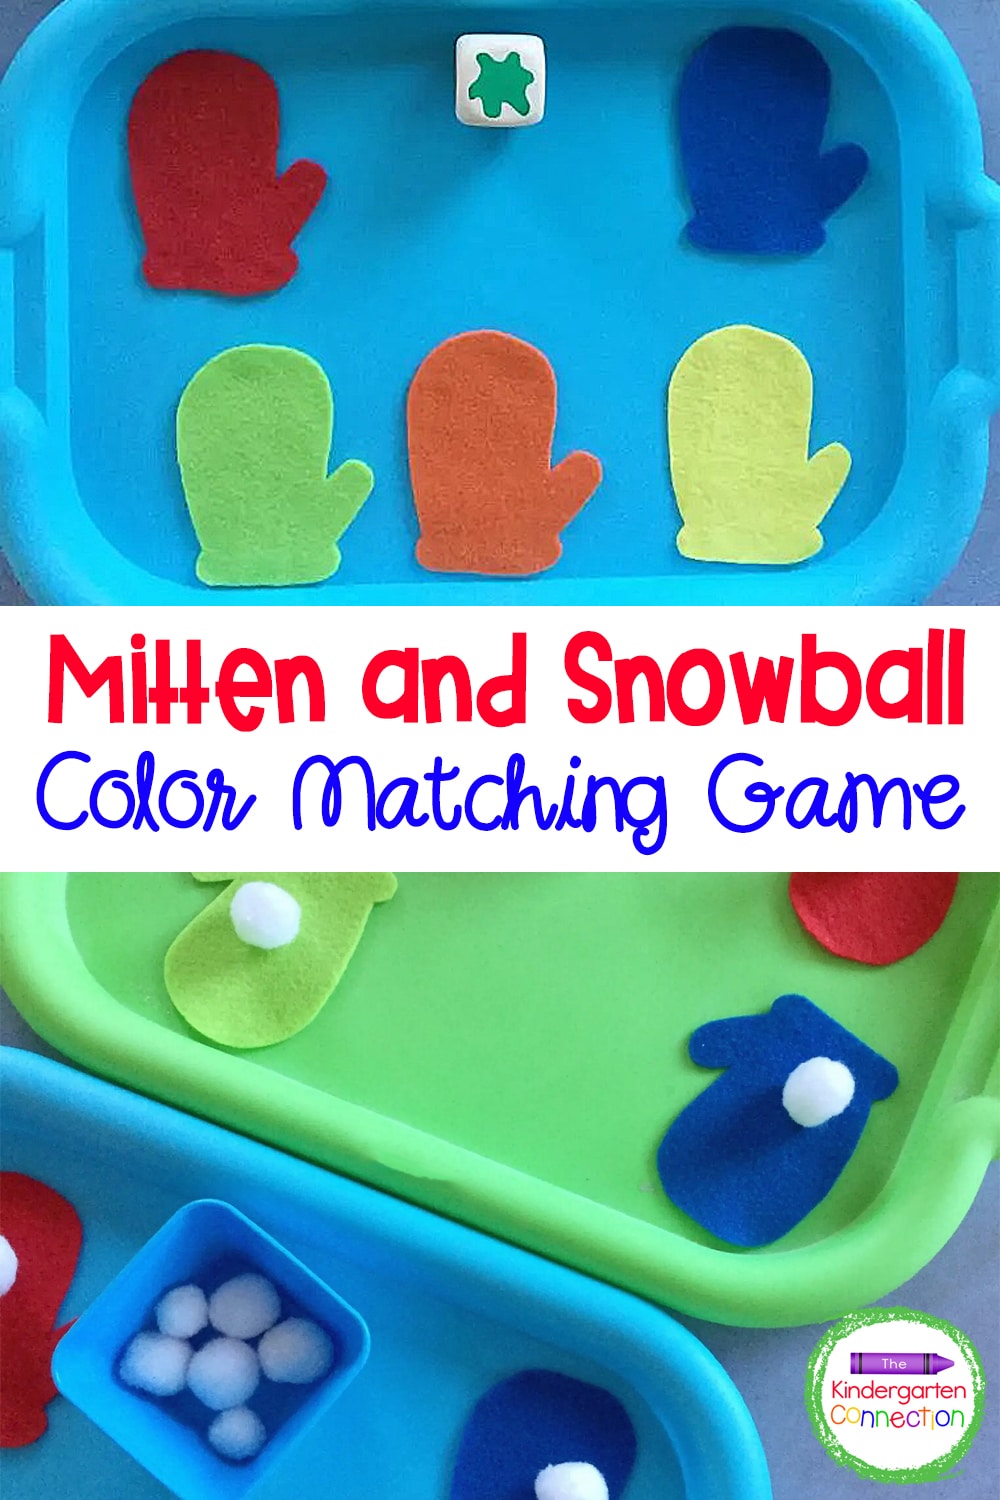 Play this fun, hands-on Mitten and Snowball Color Matching Game with your kids this winter and strengthen color recognition skills!